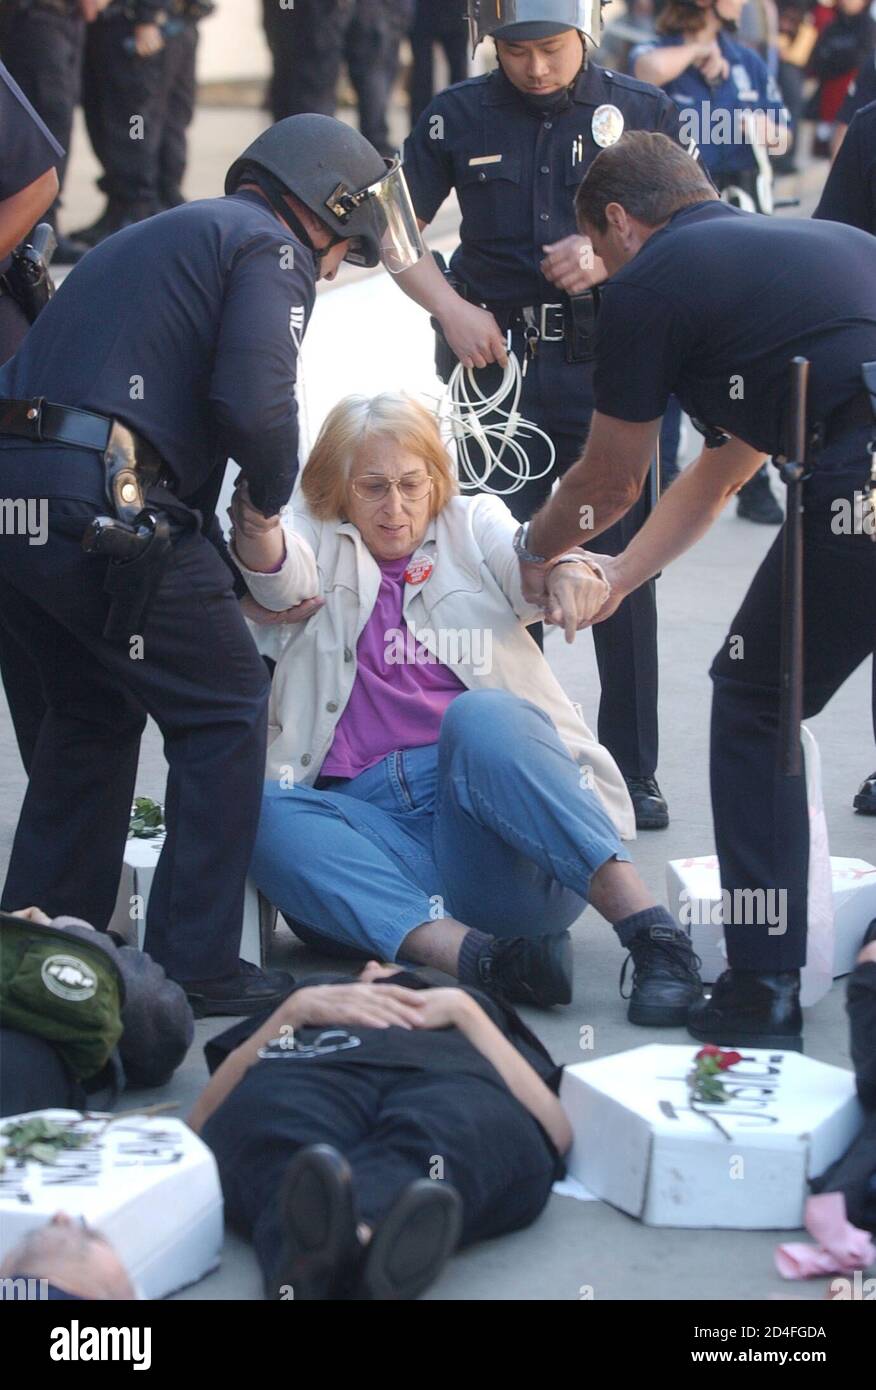 One of sixteen people arrested in front of the Federal Building in downtown Los Angeles is taken into custody, January 16, 2003, during a civil disobedience protest against war on Iraq. The arrest followed a mock funeral with the sixteen lying on the sidewalk next to cardboard coffins. REUTERS/Jim Ruymen  JR/ME Stock Photo